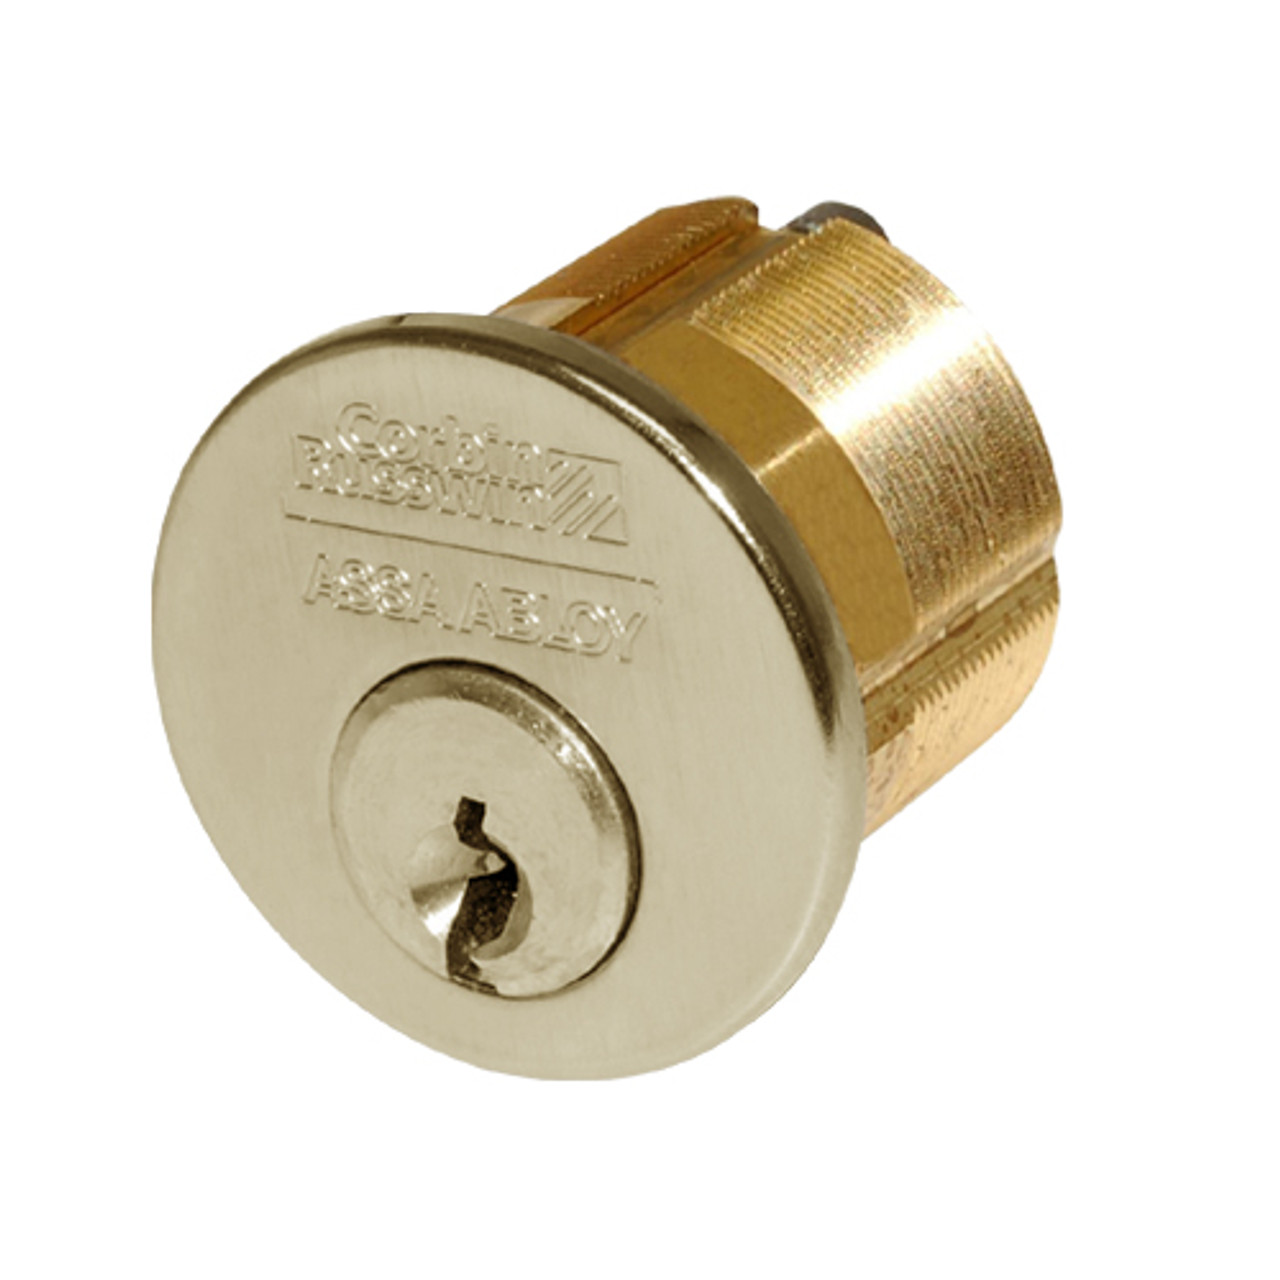 CR1000-200-A06-6-59A1-606 Corbin Conventional Mortise Cylinder for Mortise Lock and DL3000 Deadlocks with Schlage L9000 Cam in Satin Brass Finish